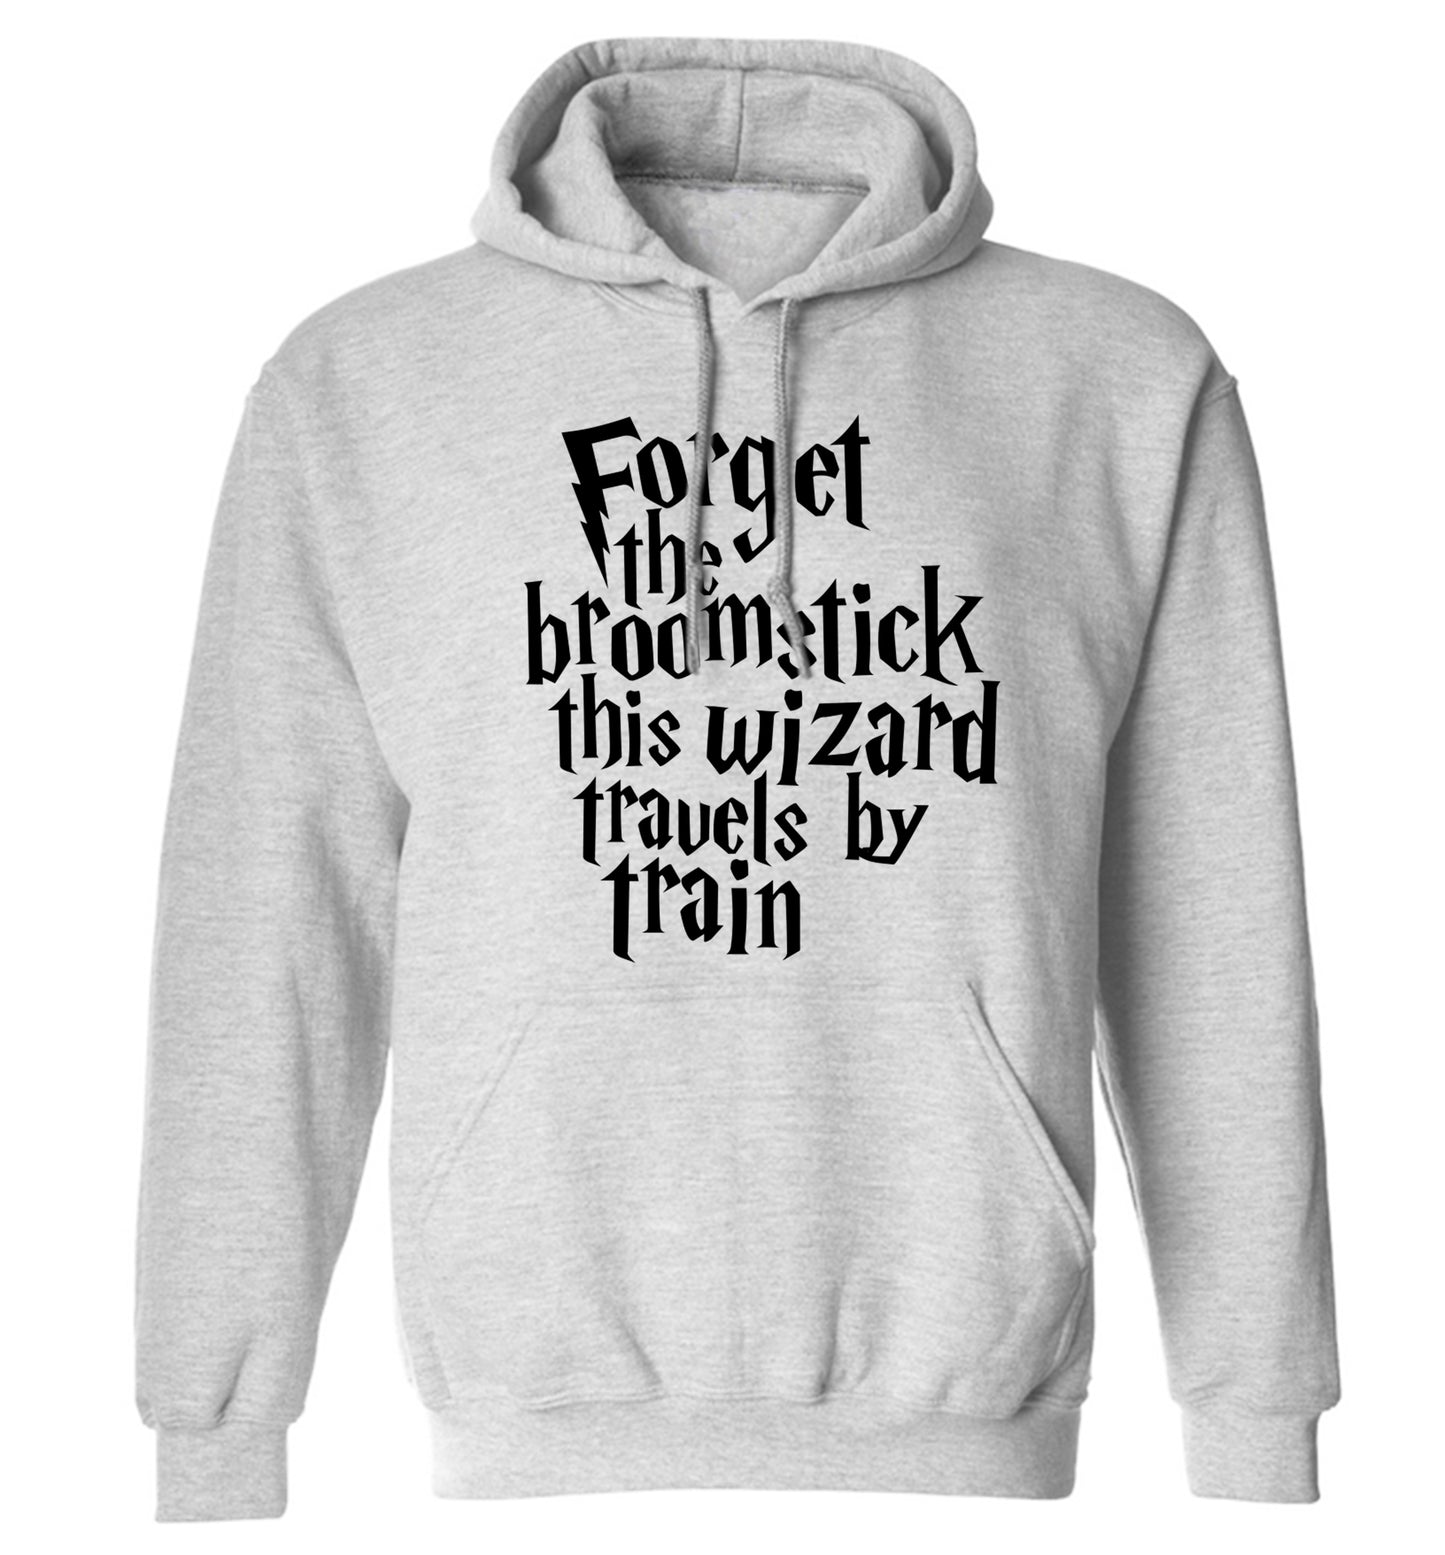 Forget the broomstick this wizard travels by train adults unisexgrey hoodie 2XL